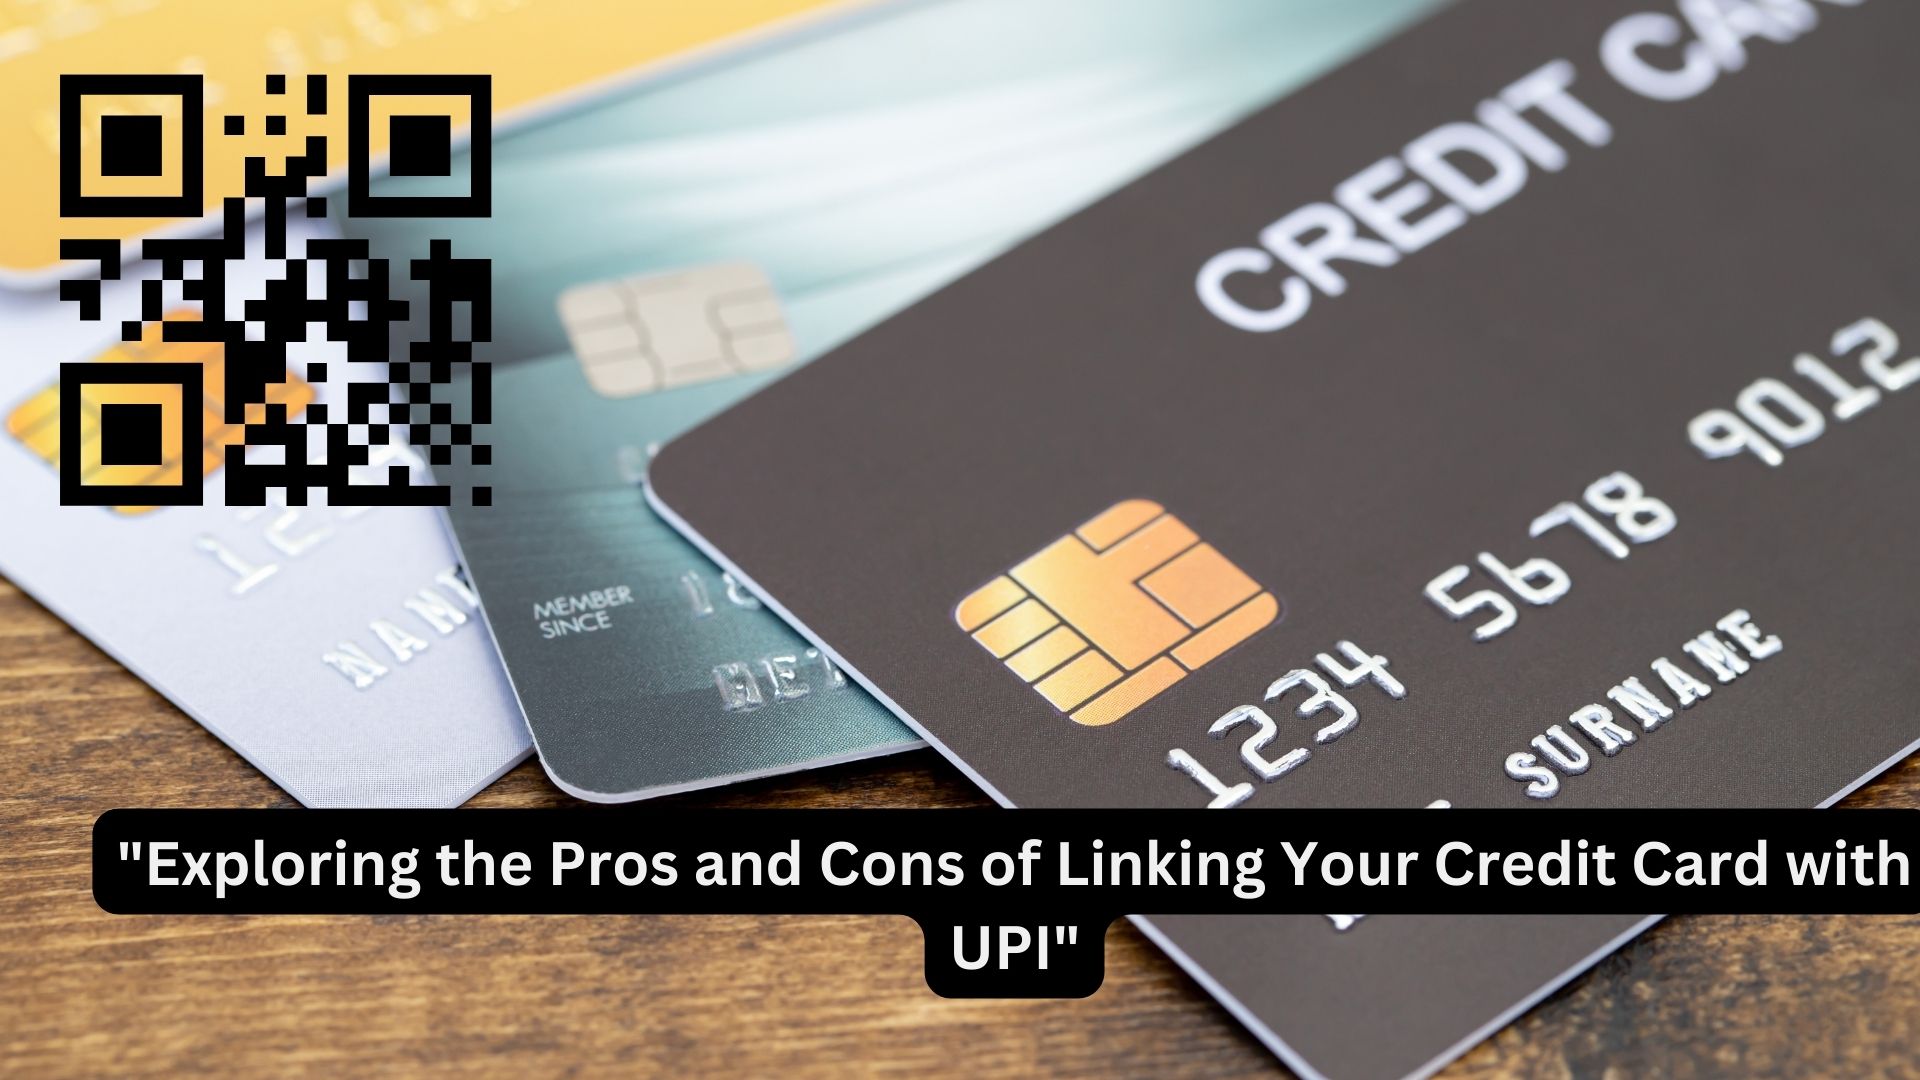 "Exploring the Pros and Cons of Linking Your Credit Card with UPI"